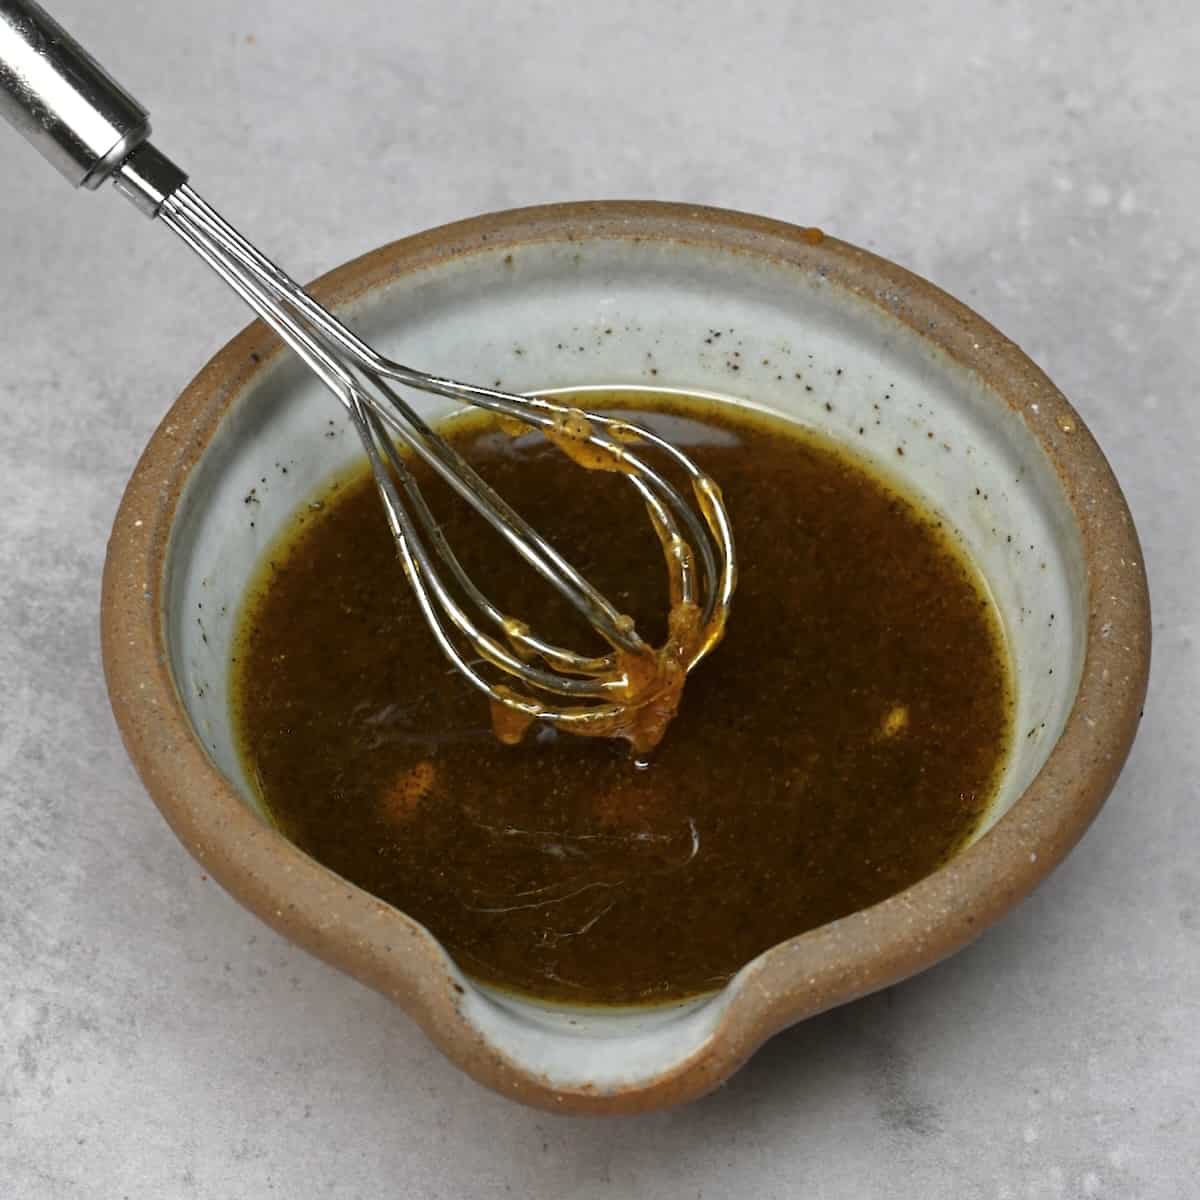 Chicken marinade in a small bowl